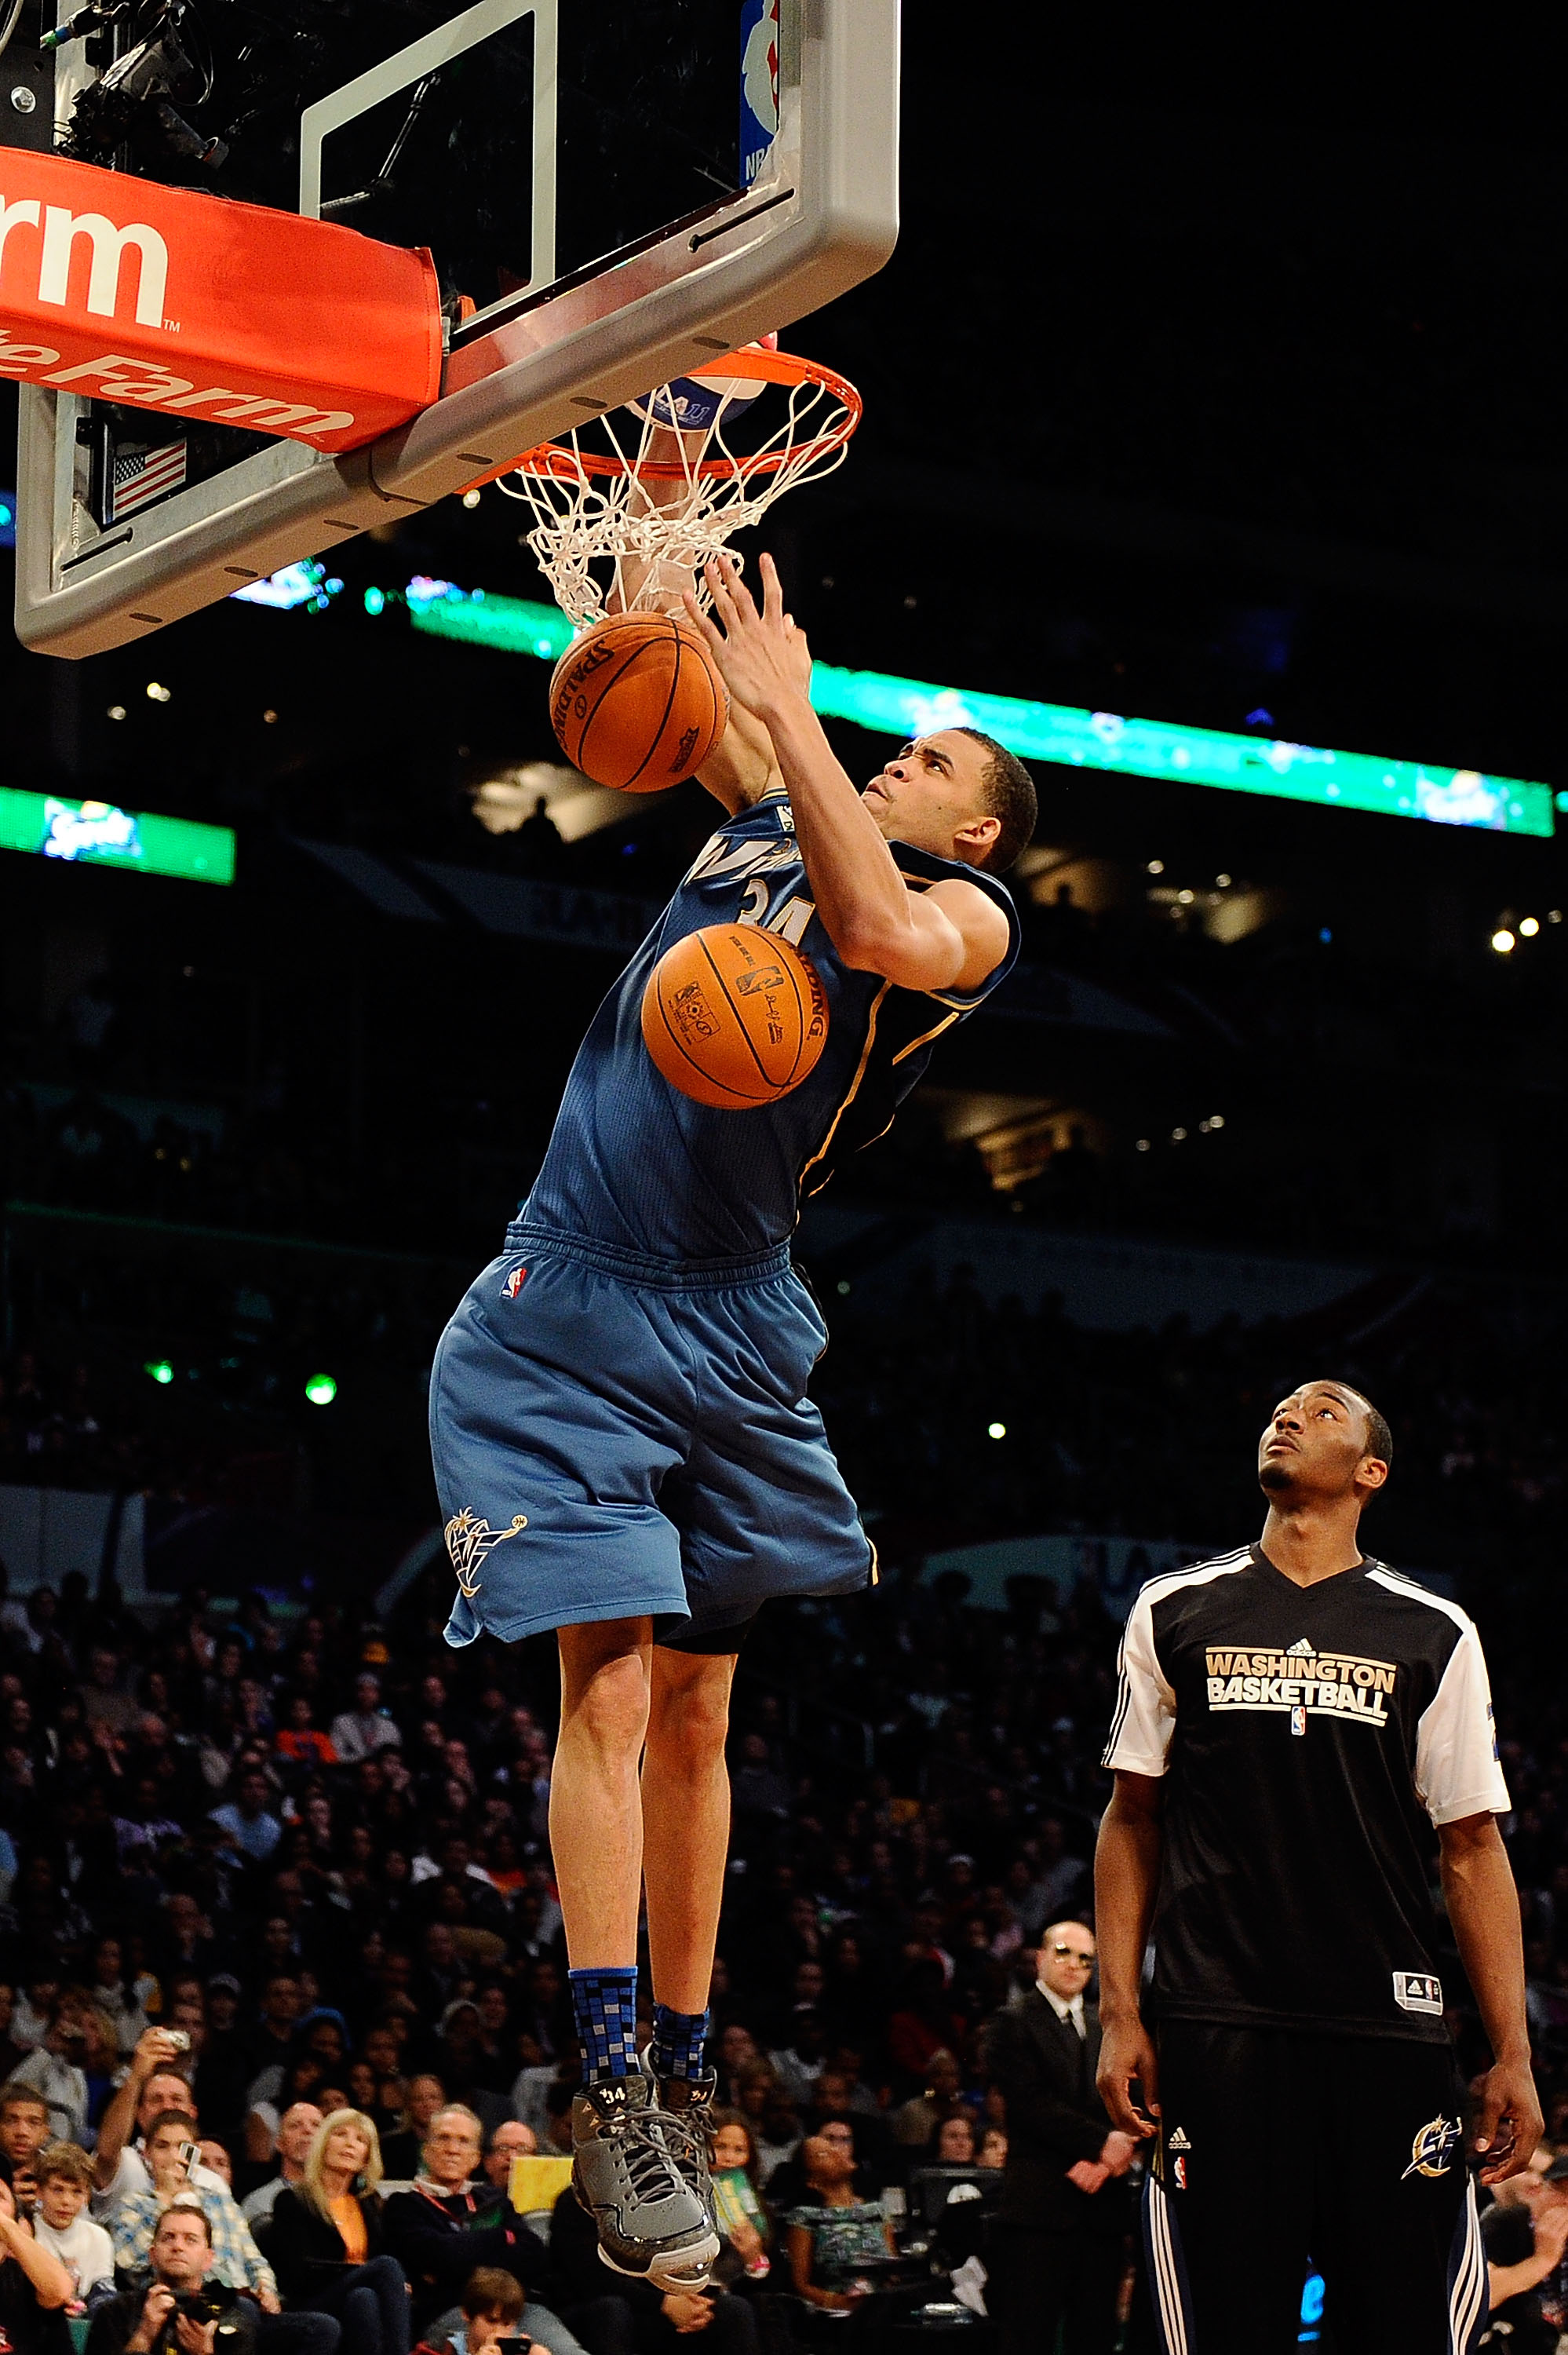 NBA dunk contest star JaVale McGee has small-school roots in West